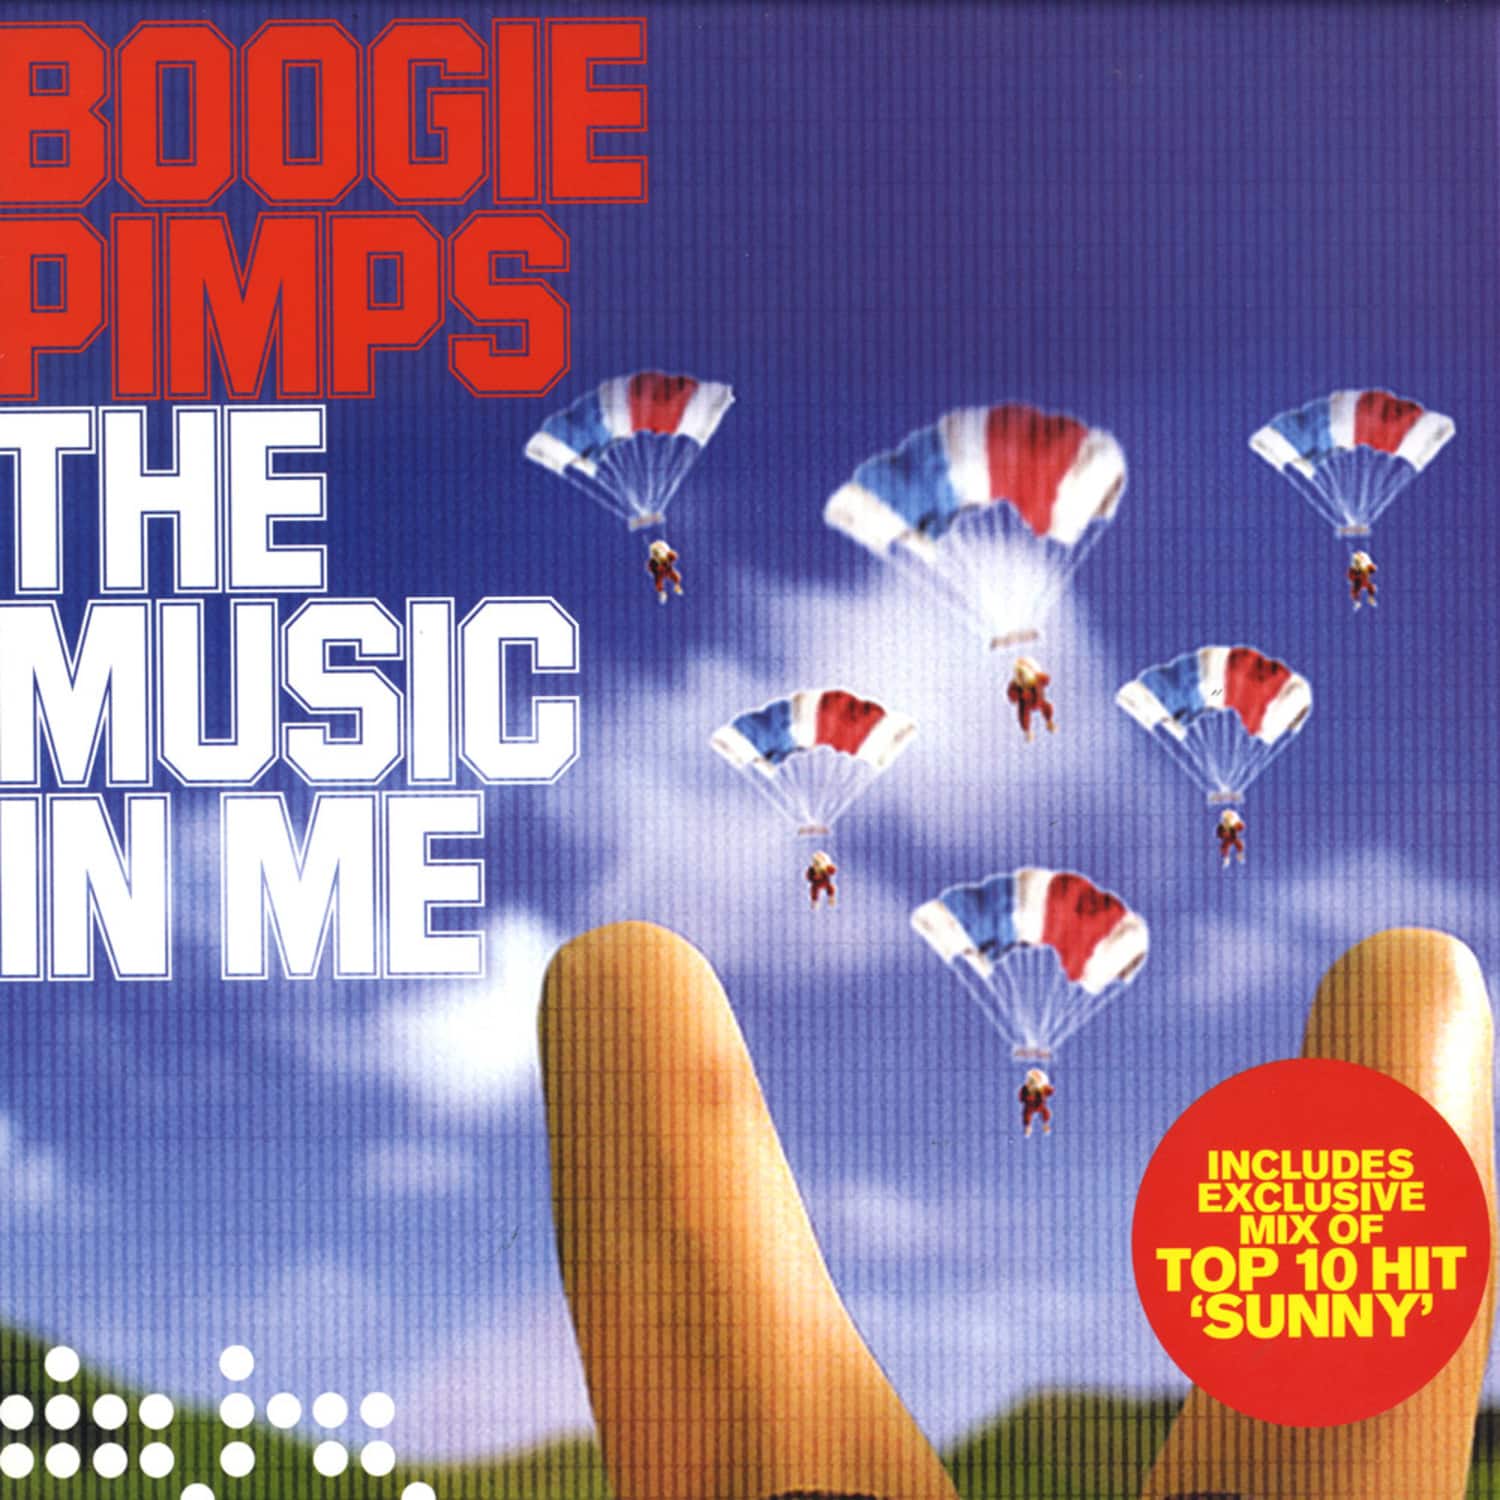 Boogie Pimps - IVE GOT THE MUSIC IN ME